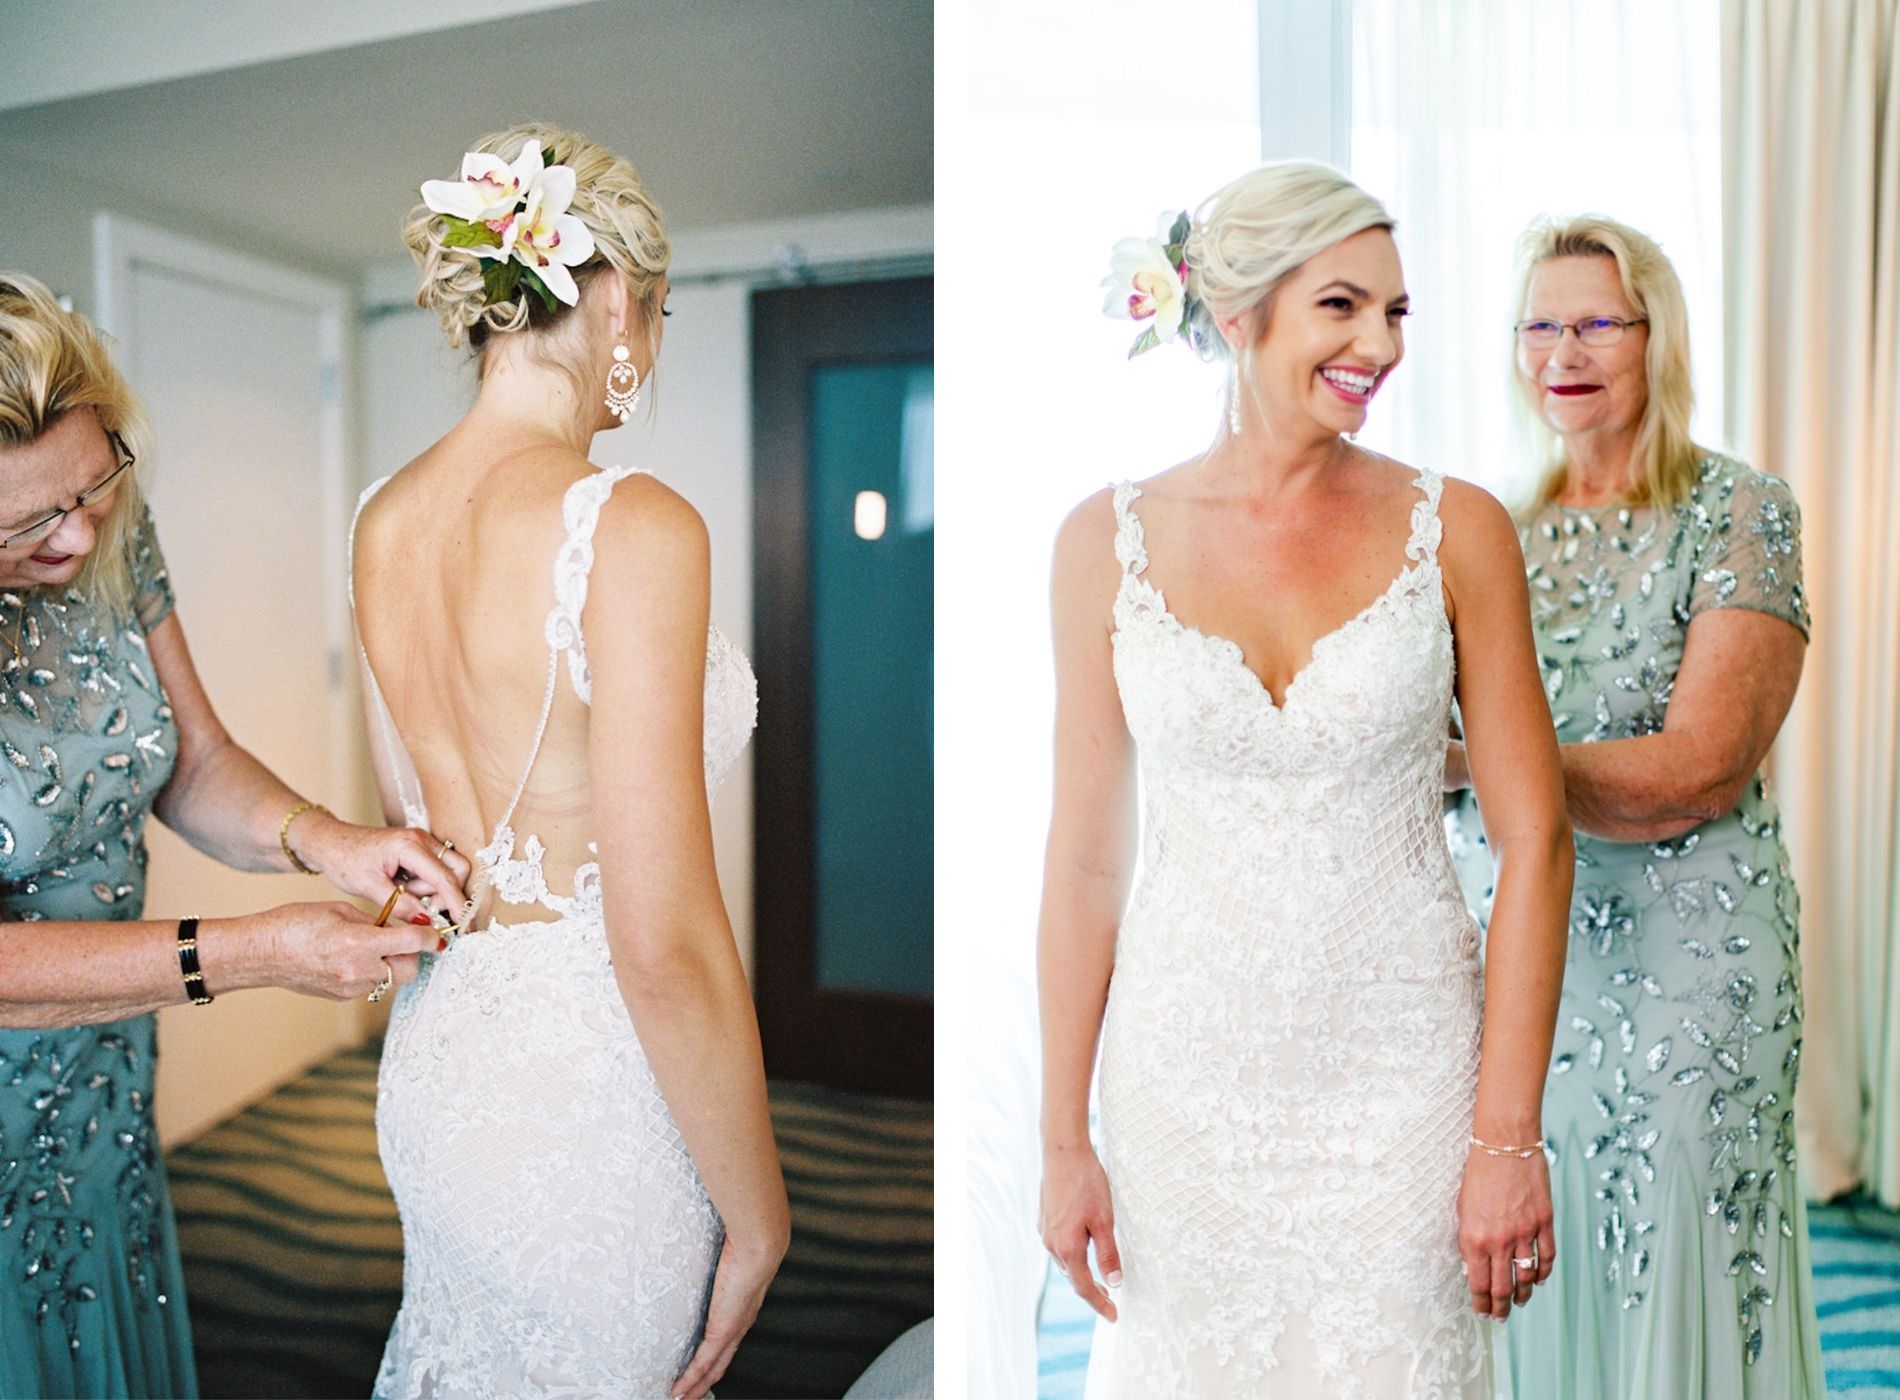 Tropical Elegant Bride Getting Ready Photo with Mom in Aqua Blue Dress Zipping Bride's Dress, Lace, V Neckline, Tank Top Straps, Low Open Back Wedding Dress, Tropical White Orchid in Updo Hair